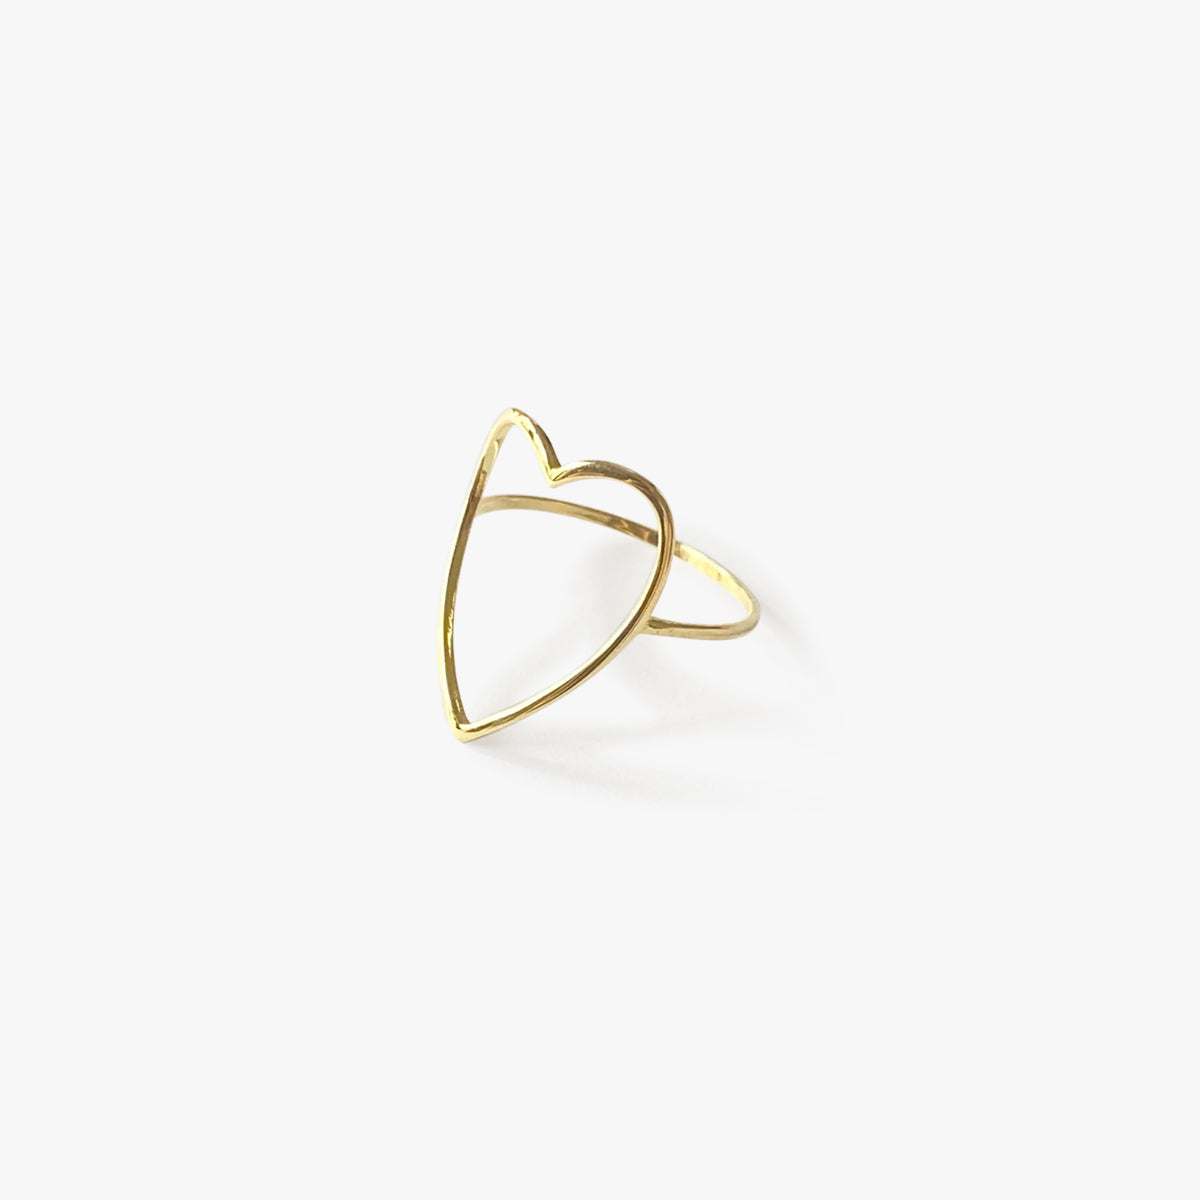 The Tat Heart Ring in Solid Gold